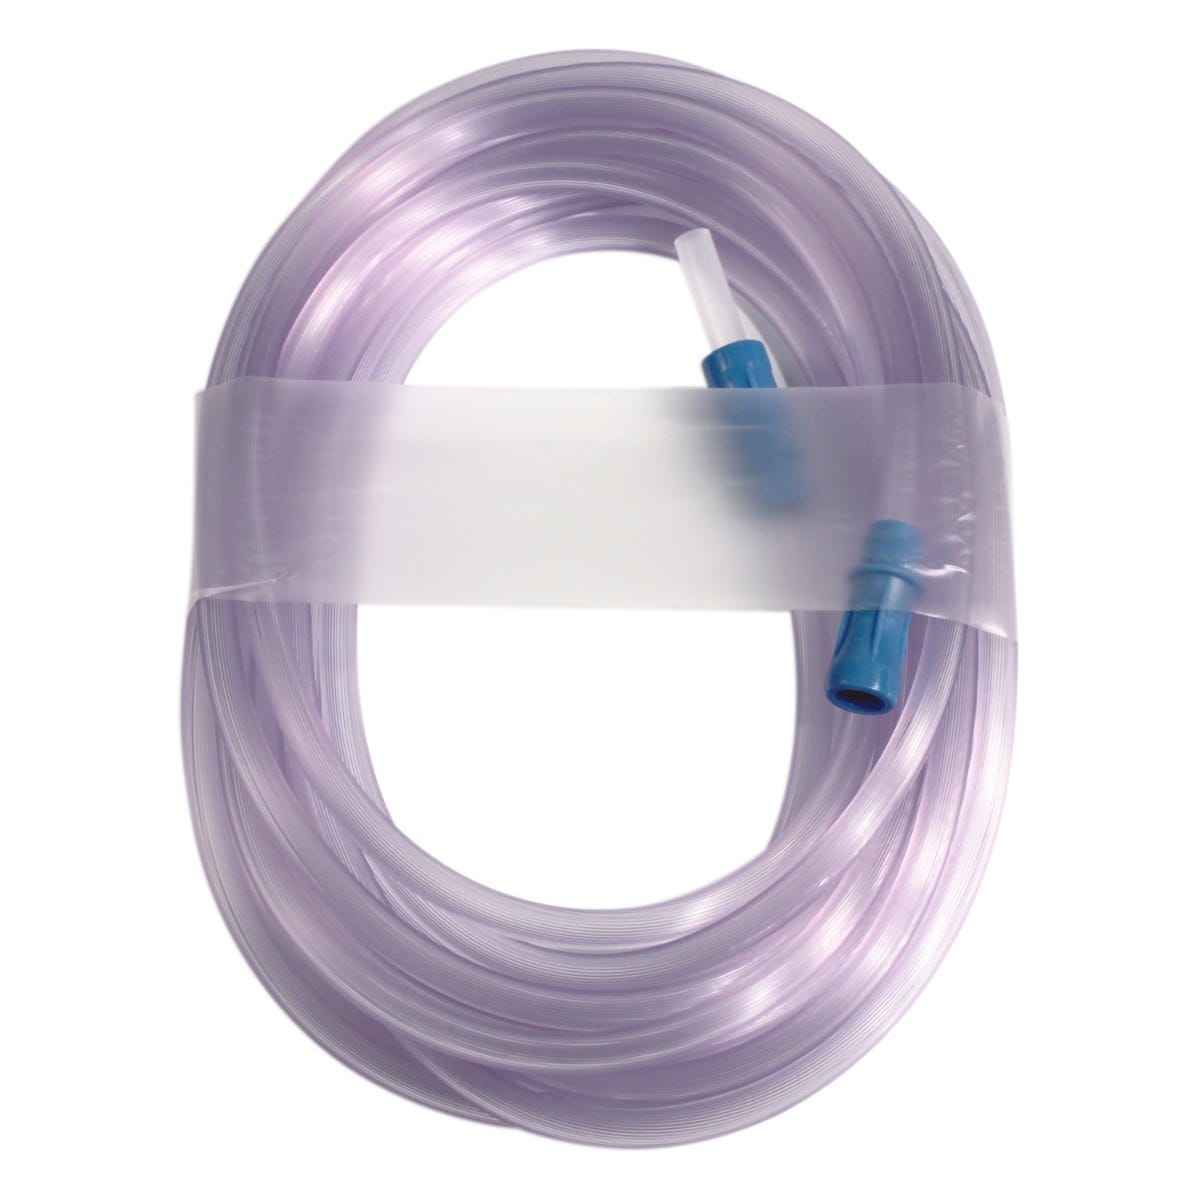 Suction Tubing 3/16" ID x 20' , *Sterile*